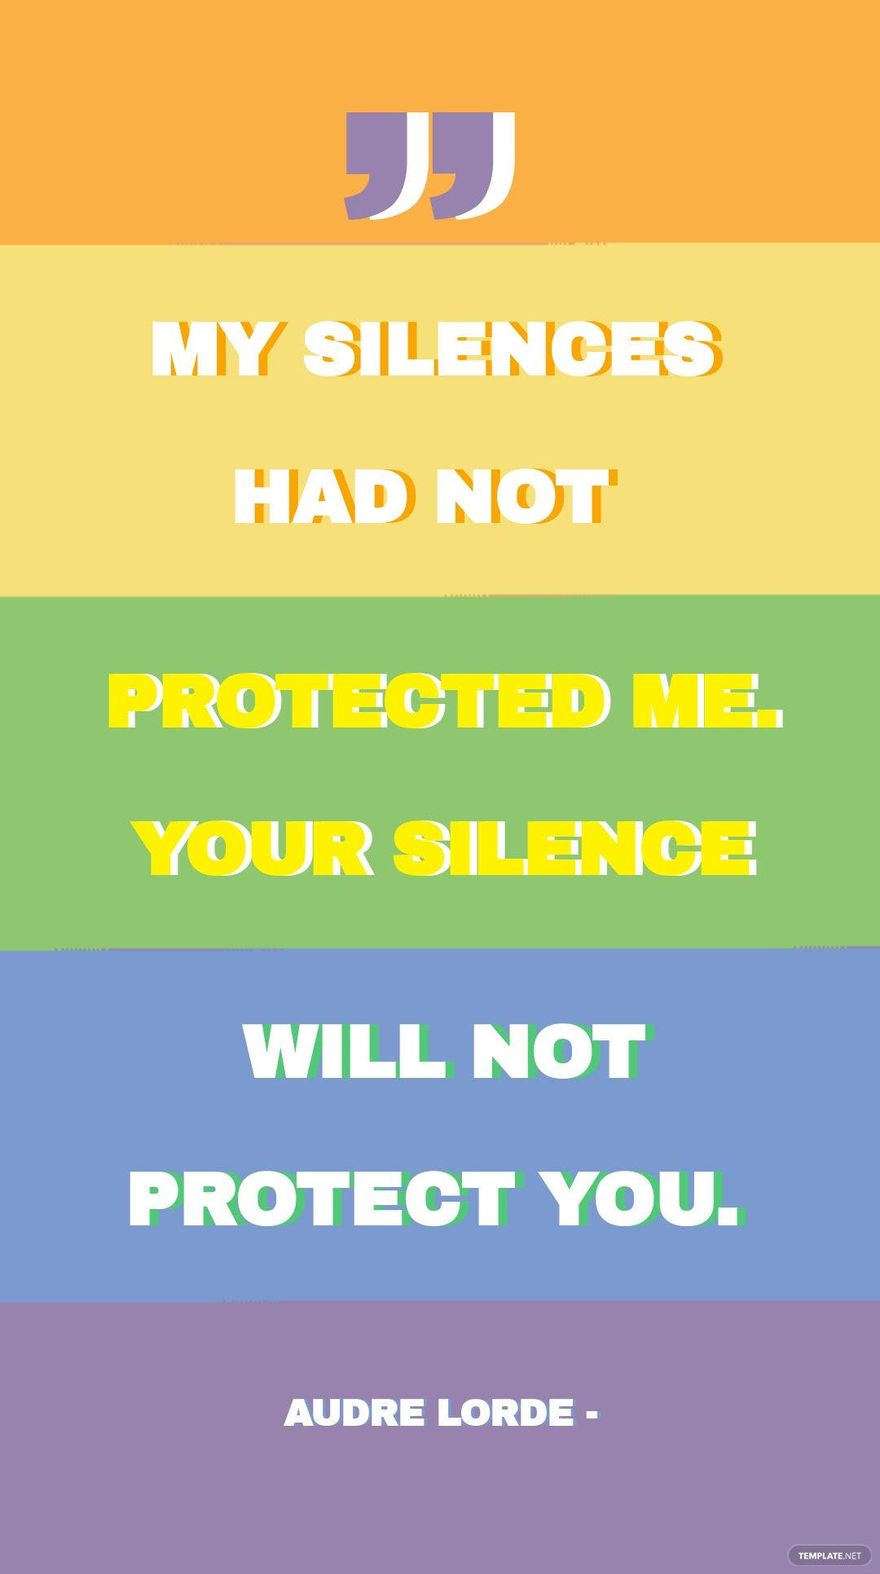 Audre Lorde - My silences had not protected me. Your silence will not protect you. in JPG